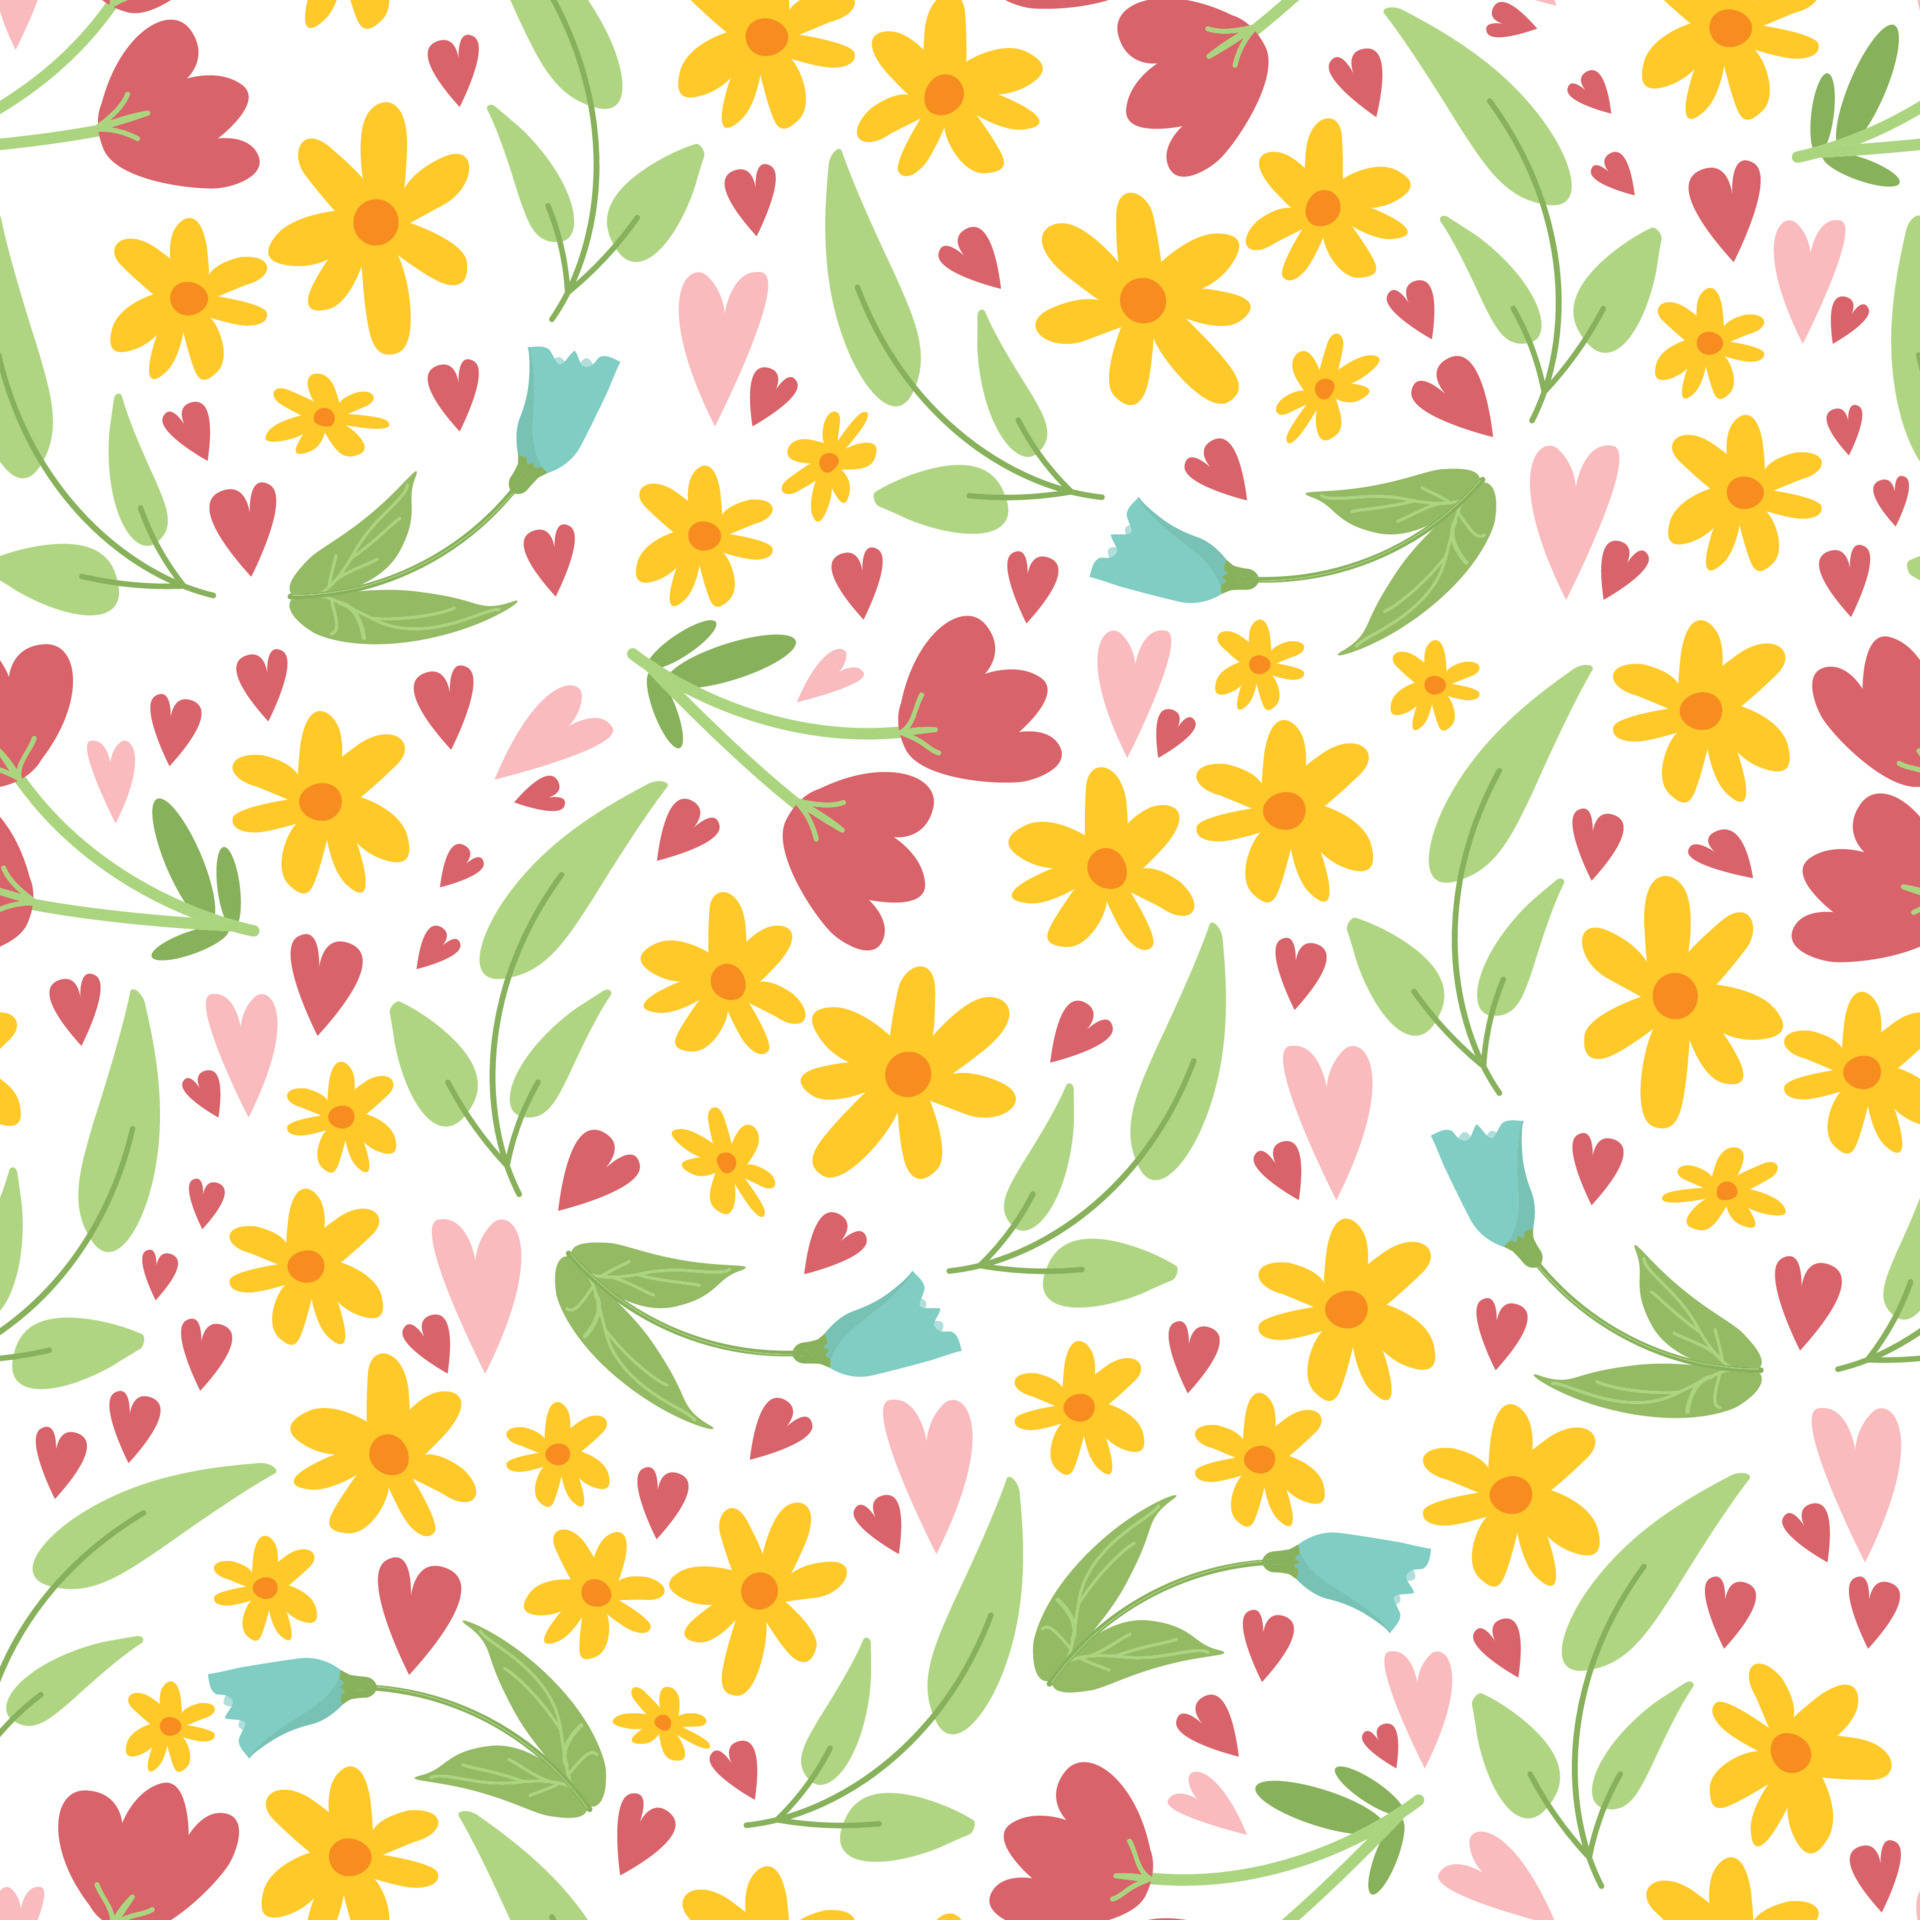 Vibrant Flower Design with Colorful Hearts Wallpaper